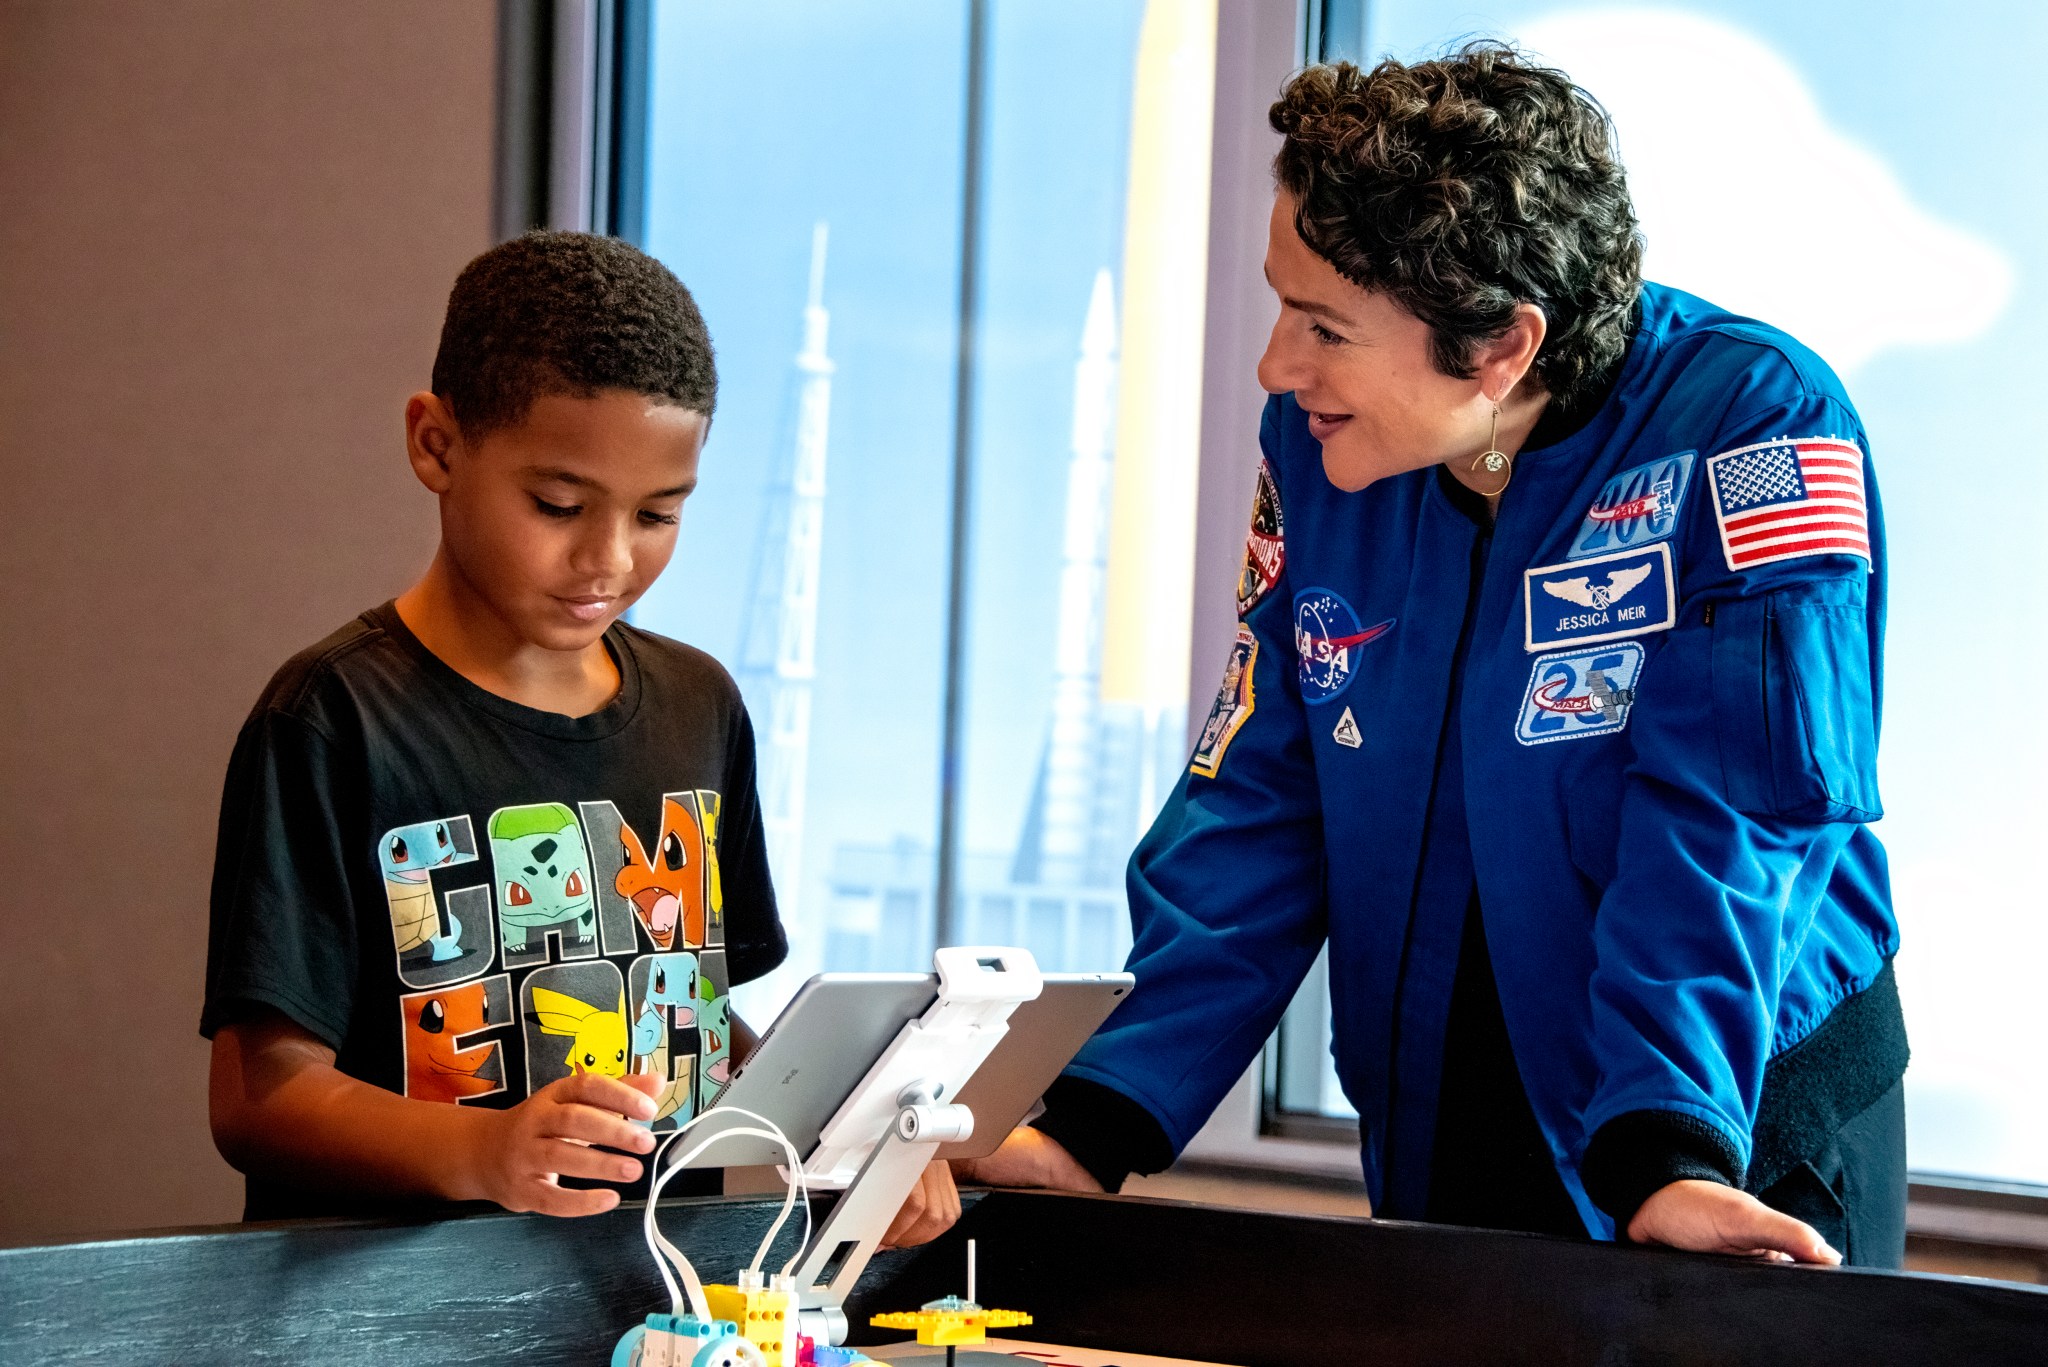 NASA Astronaut Jessica Meir interacts with student during a LEGO Education Build to Launch event held at the Kennedy Space Center Visitors Center in the days leading up to the first Artemis I launch attempt in August 2022.